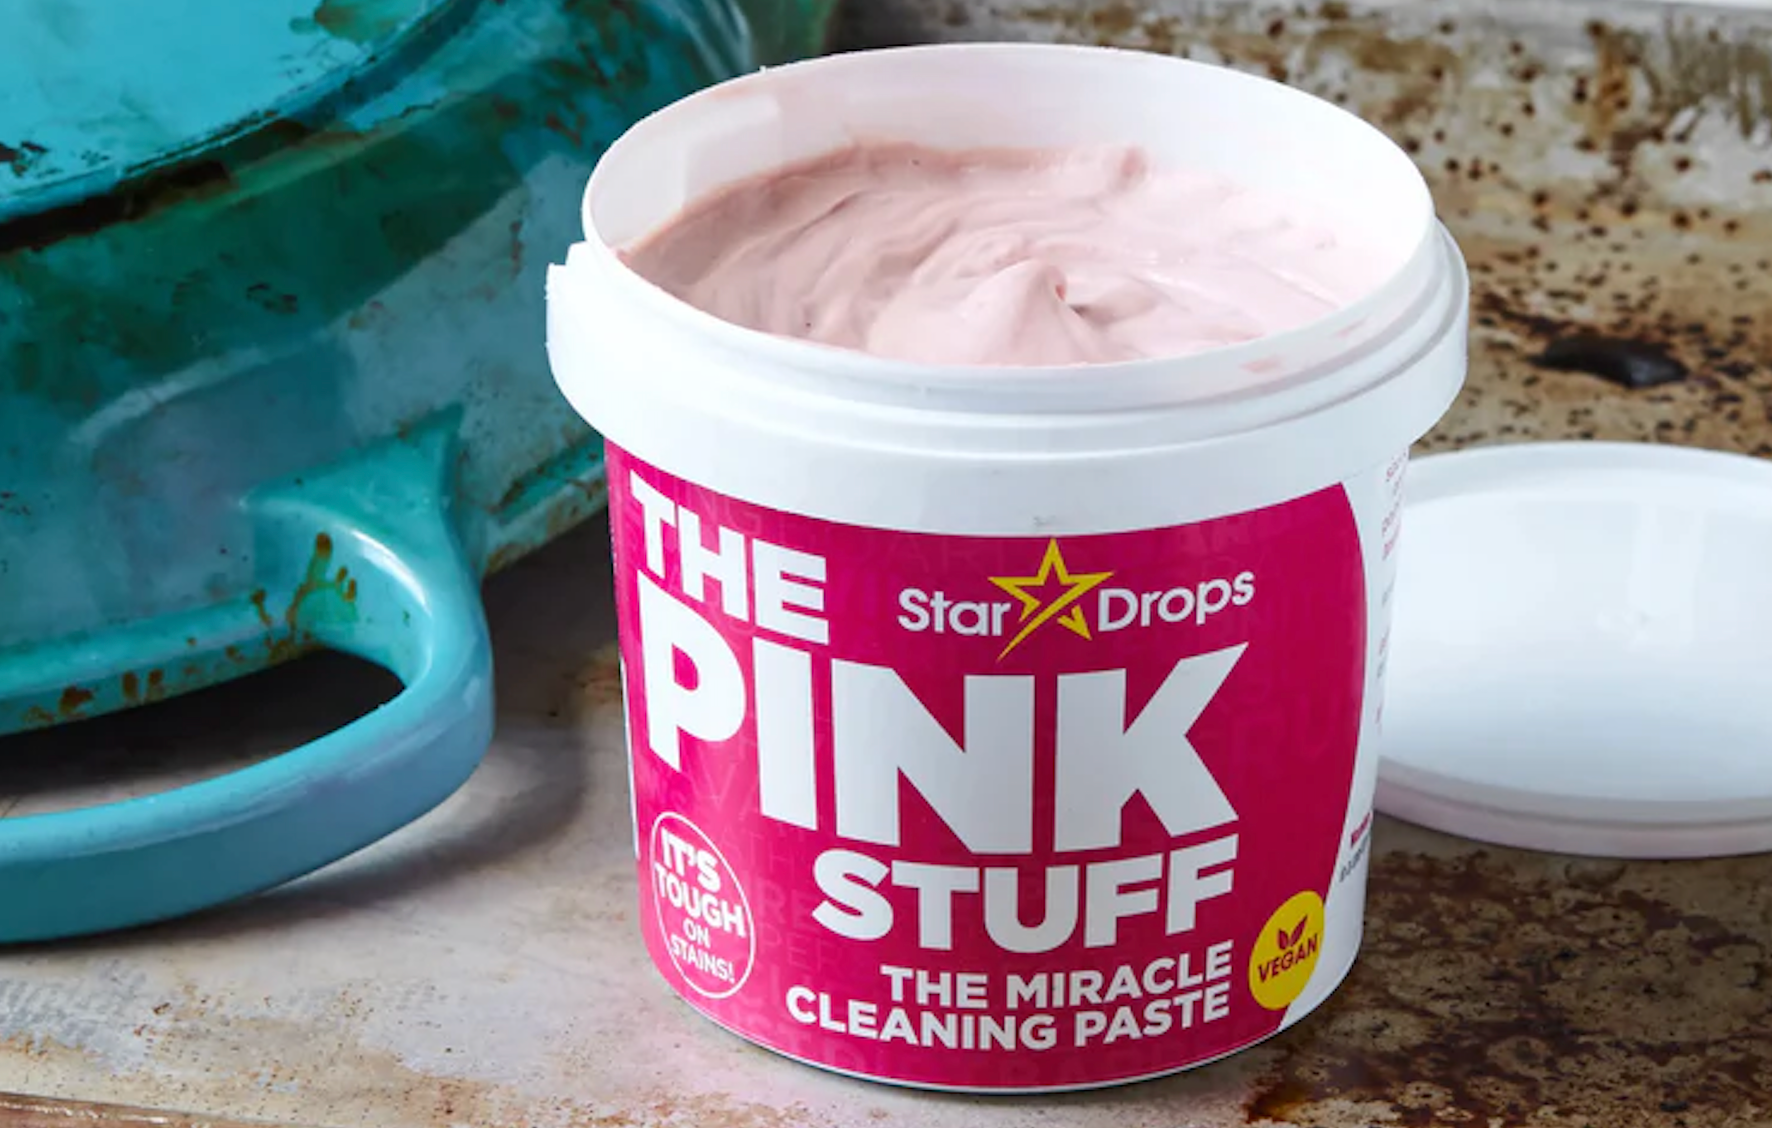 12 x The Pink Stuff Miracle Cleaning Paste (850g)